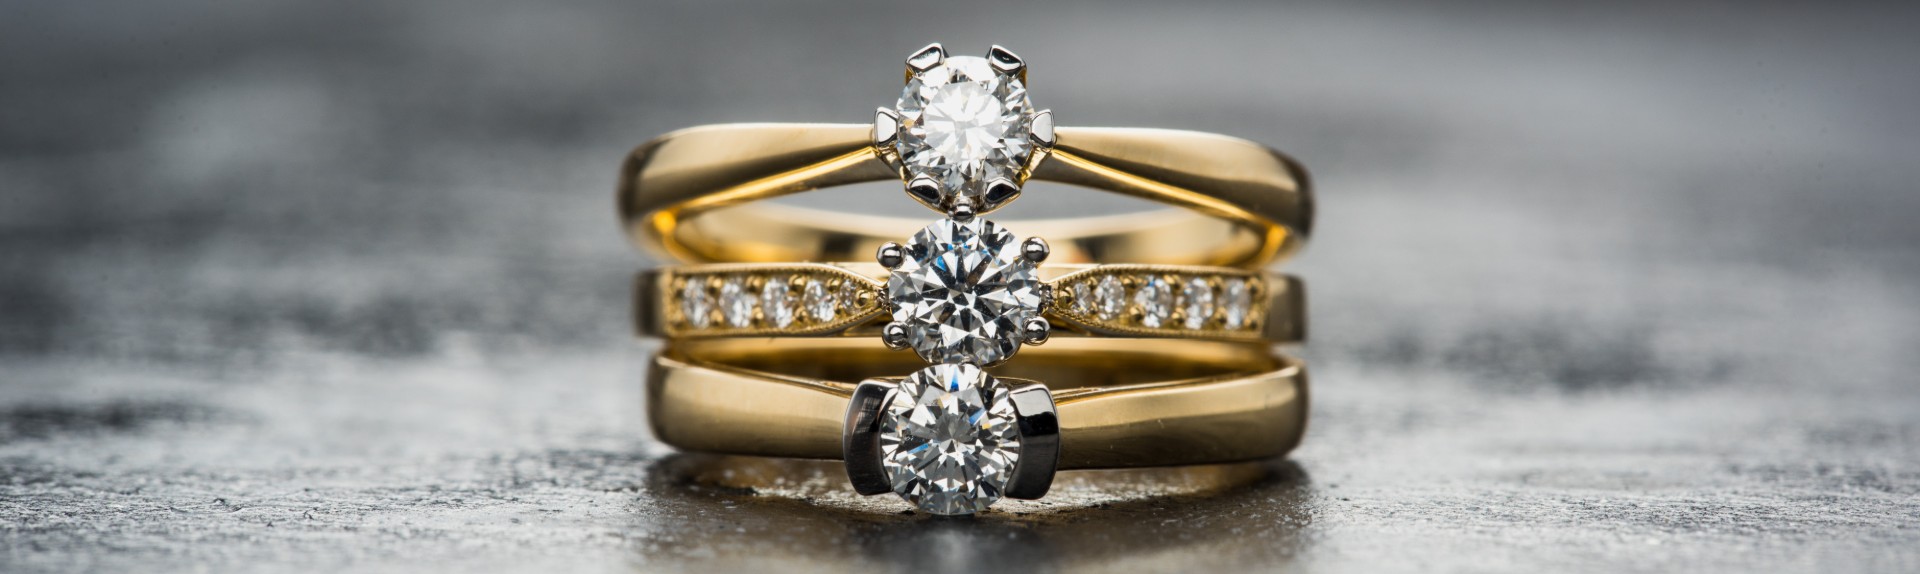 Engagement Ring Styles at BARONS Jewelers